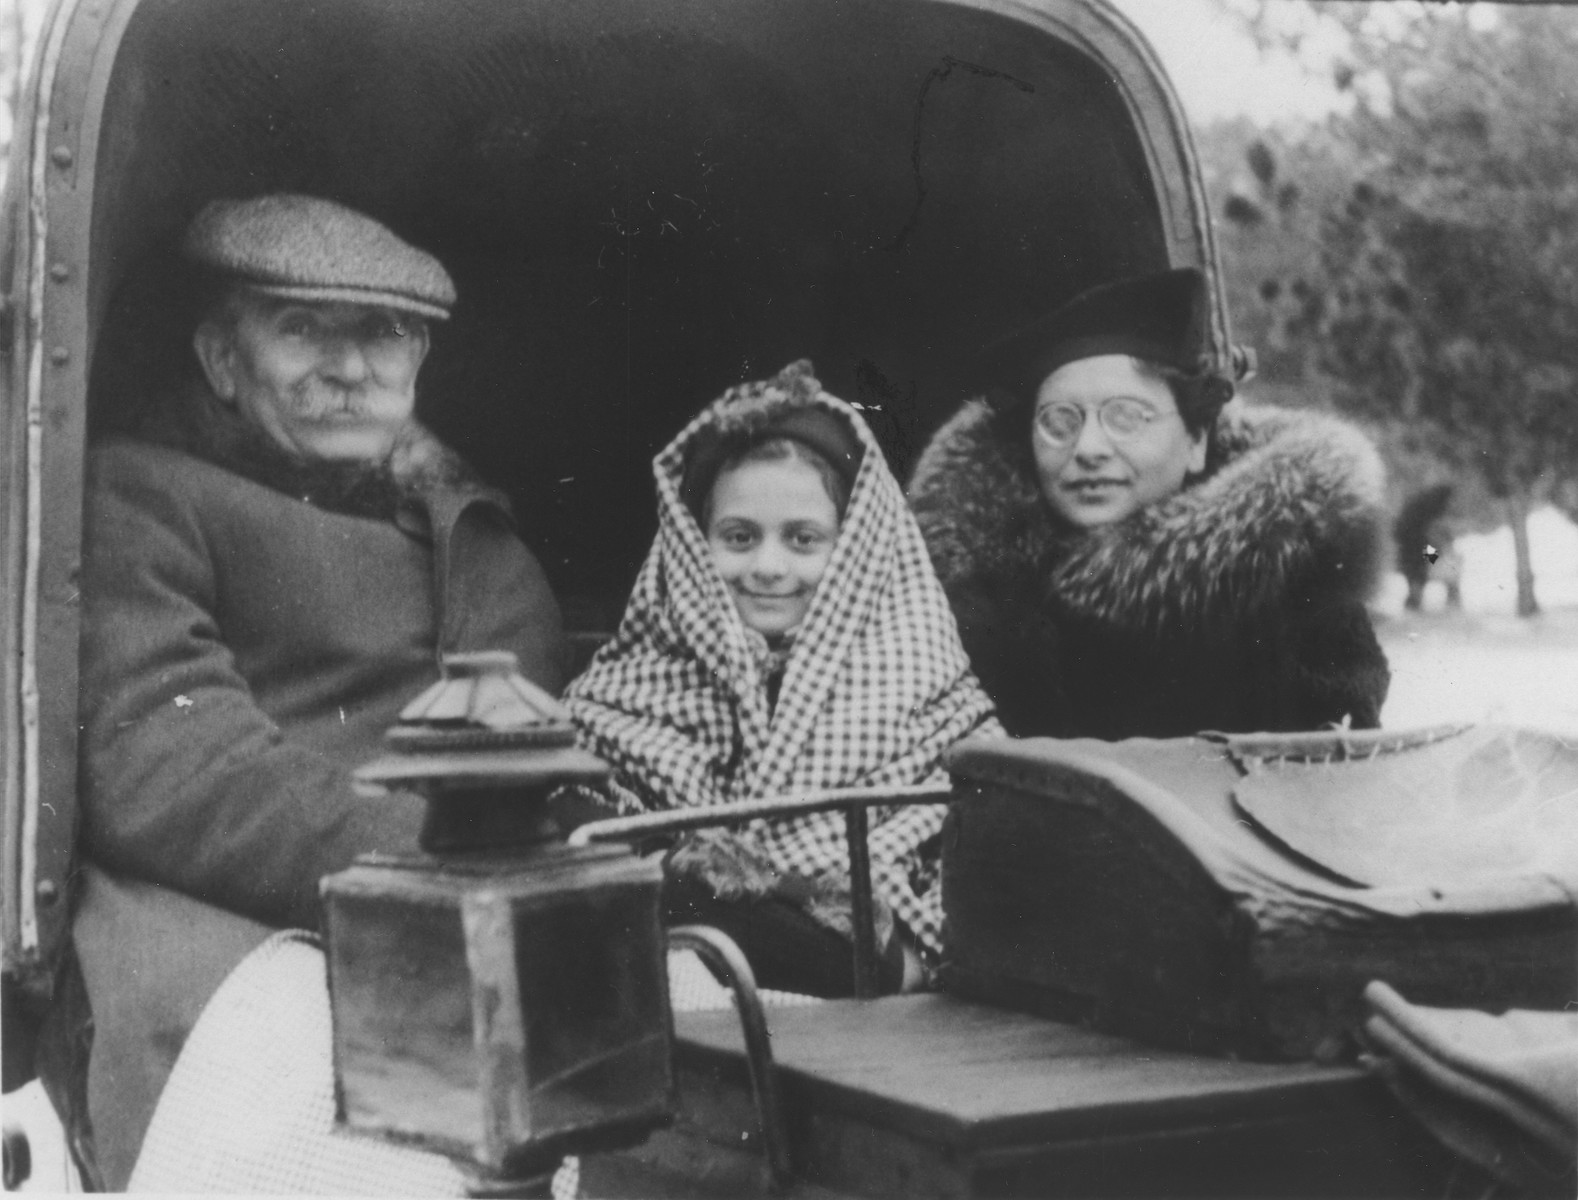 Basia Berkowicz rides in a carriage with her mother and another relative in Otwock, Poland.

Pictured from left to right are: Natan Taca, Basia Berkowicz and Bina Berkowicz.